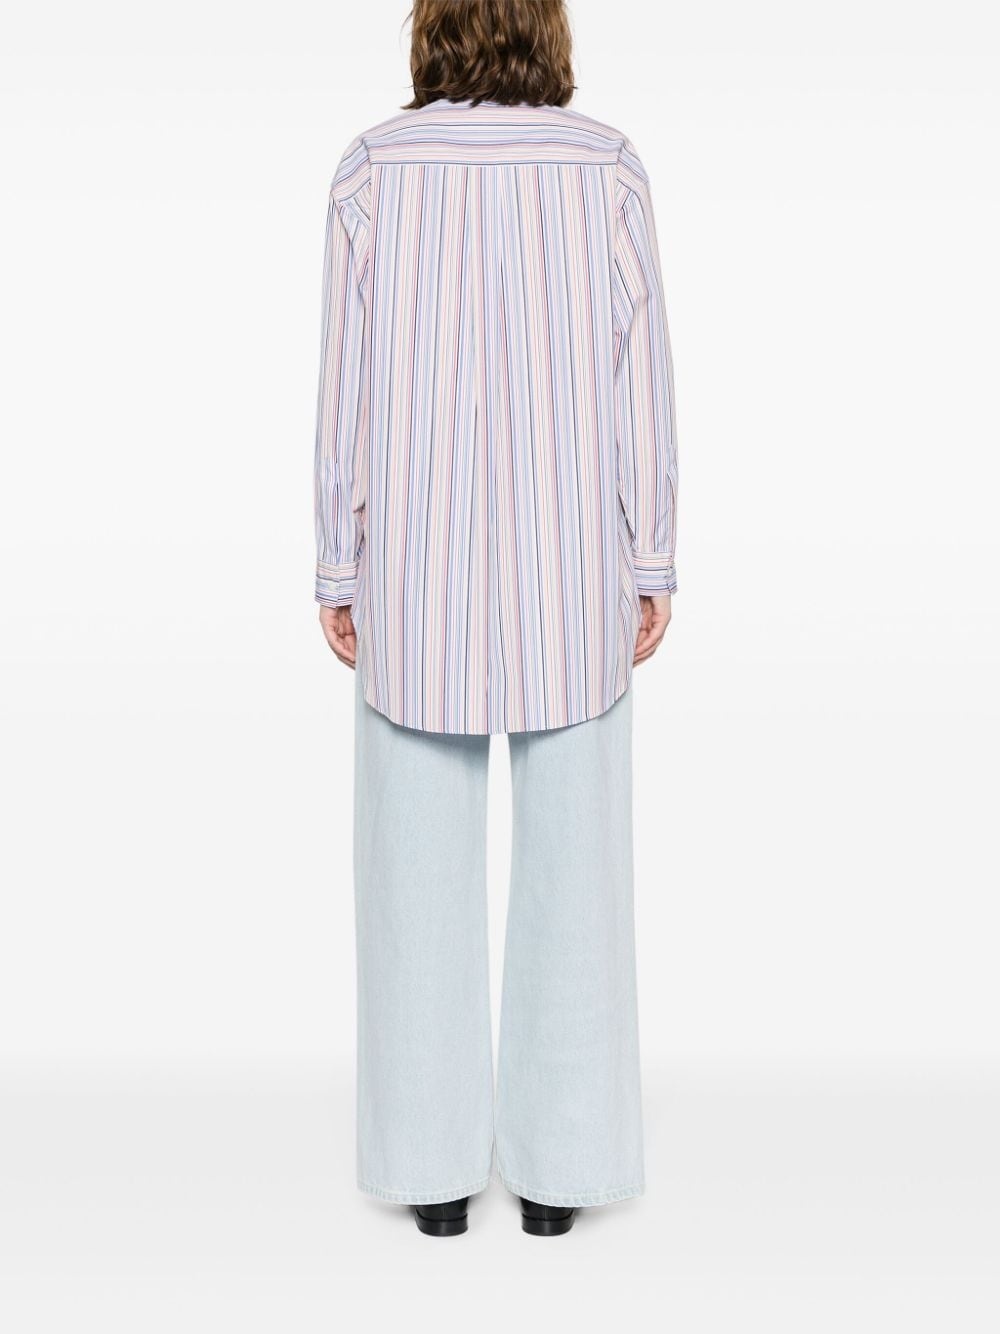 Pegaso-embroidered striped shirt - 4